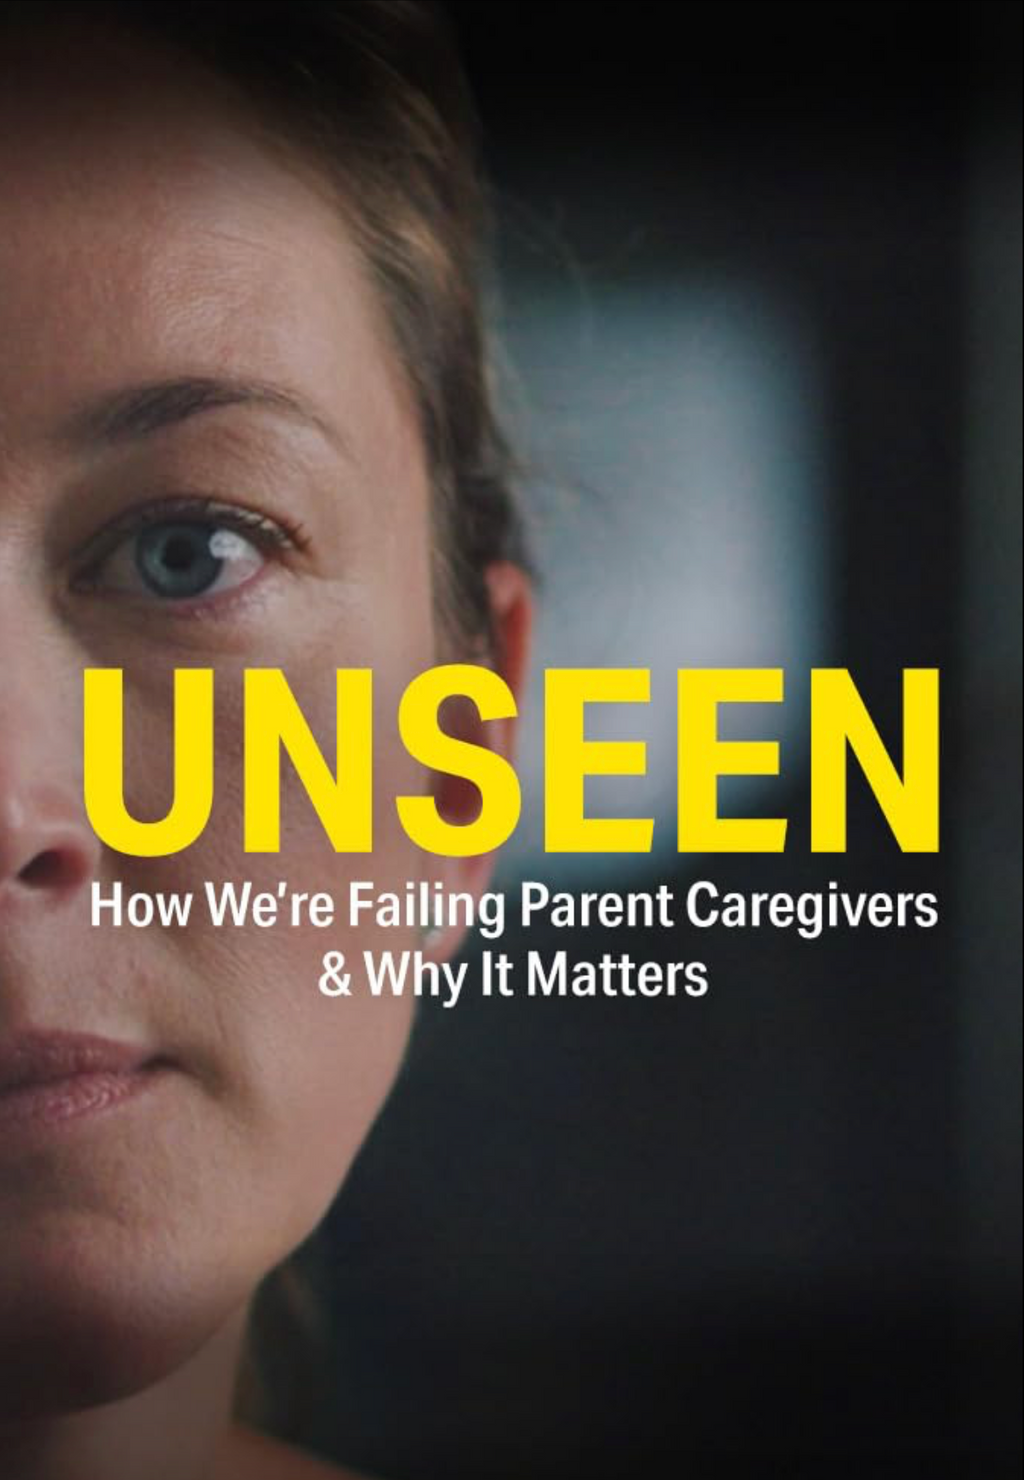 Unseen: How We’re Failing Parent Caregivers & Why It Matters